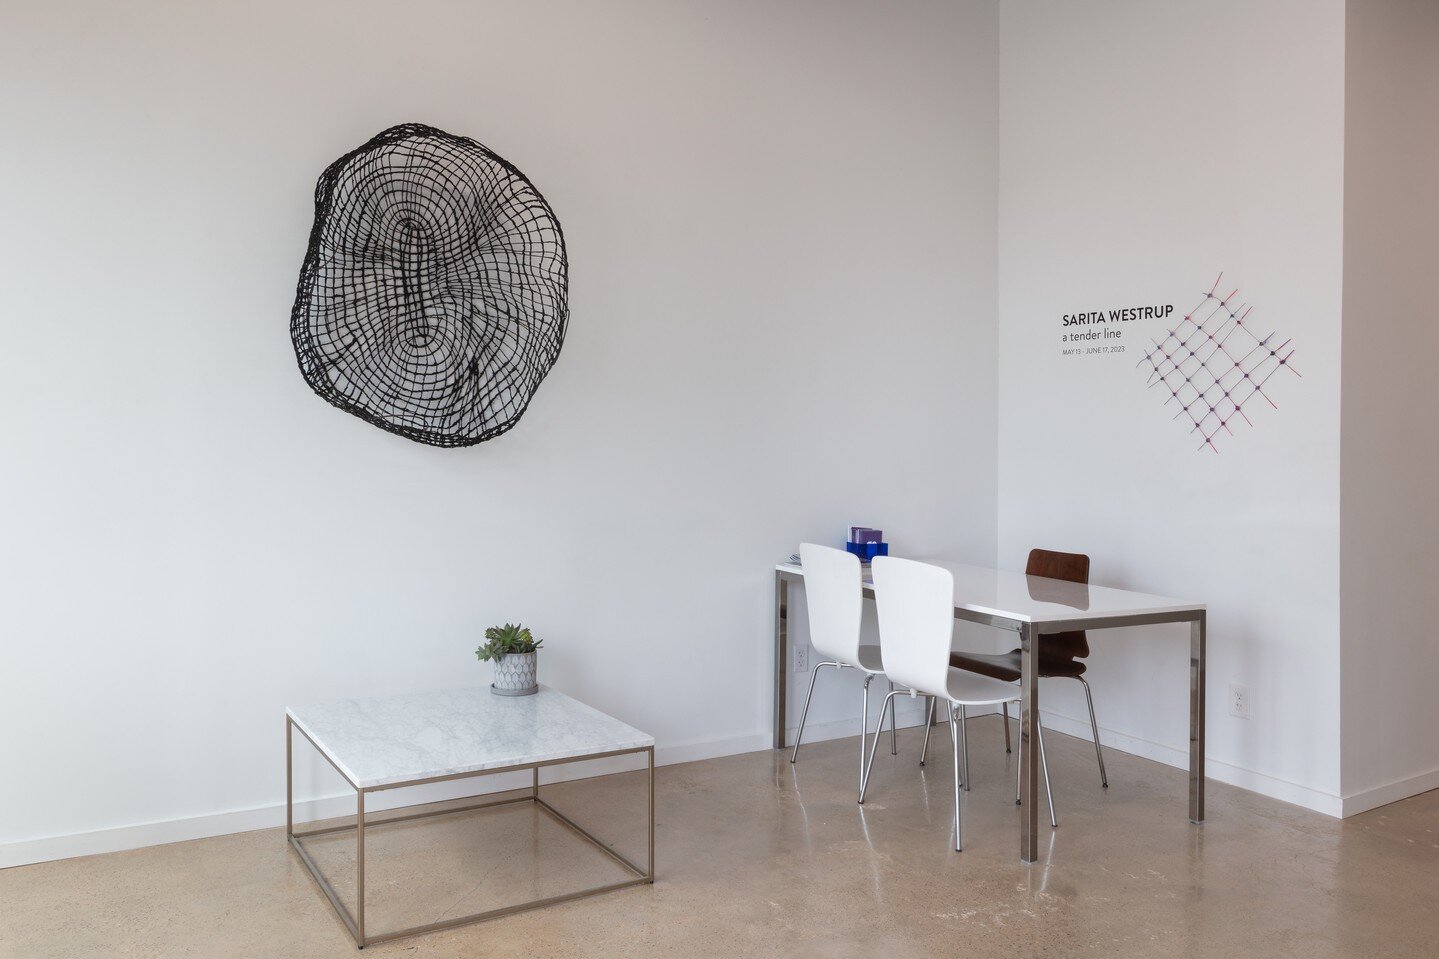 This is the last week to visit Cluley Projects and experience Sarita Westrup: a tender line.

The exhibition is on view through  this Saturday, June 24th, 2023.

Dallas-based artist Sarita Westrup is one of two winners of Cluley Projects' 2022 Open C